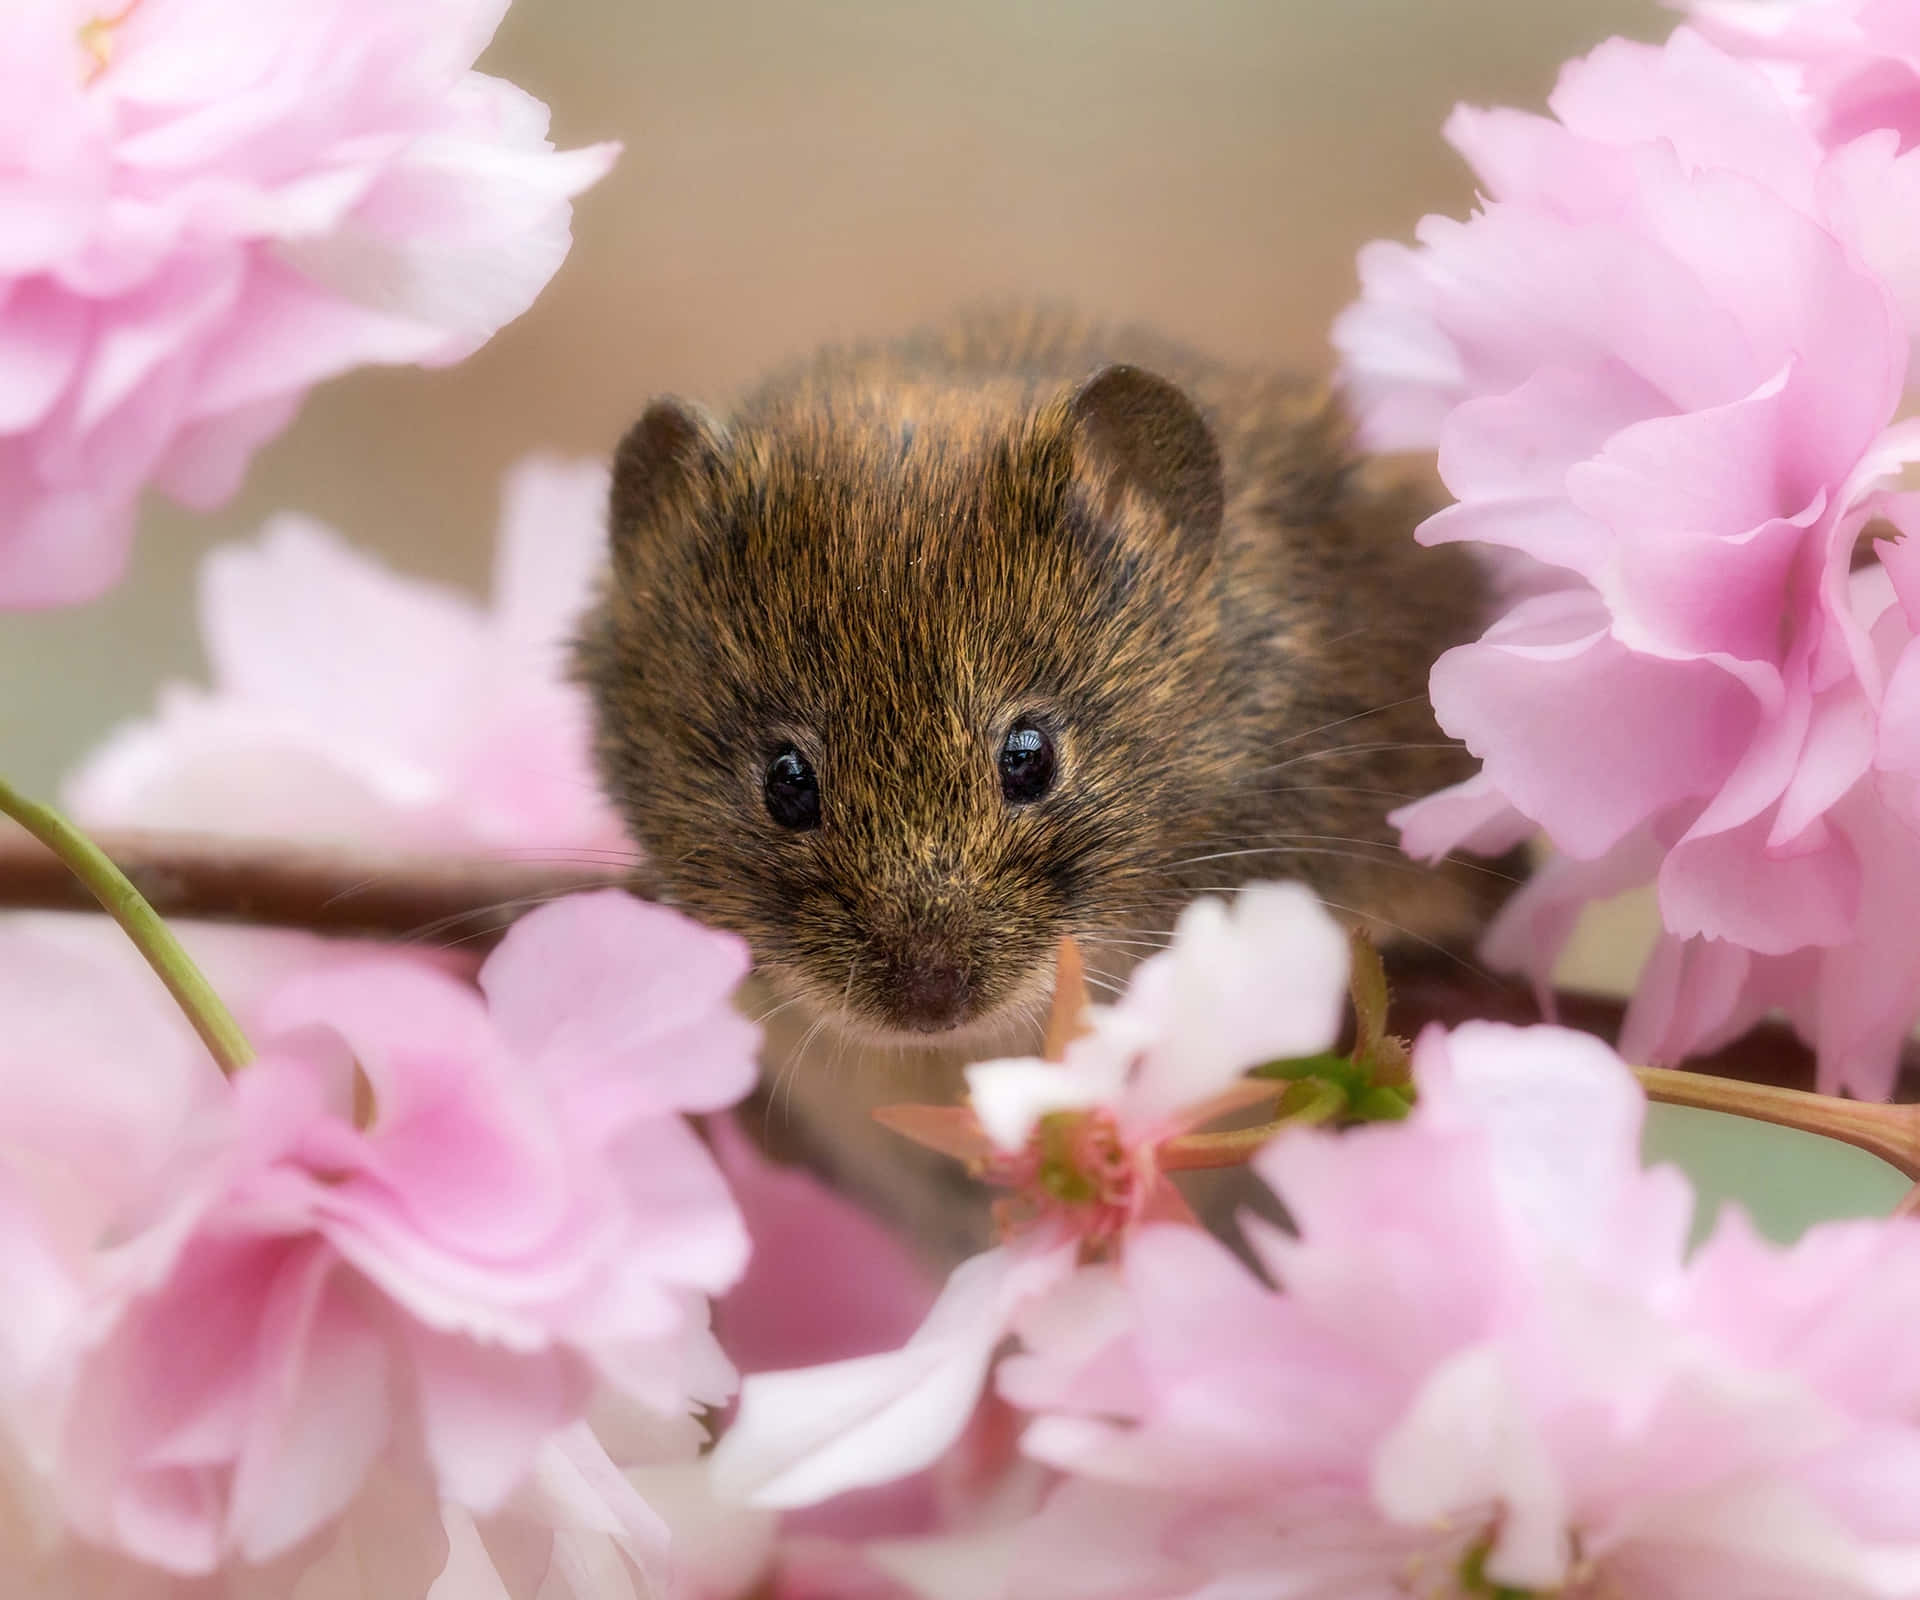 Vole Among Pink Blossoms Wallpaper